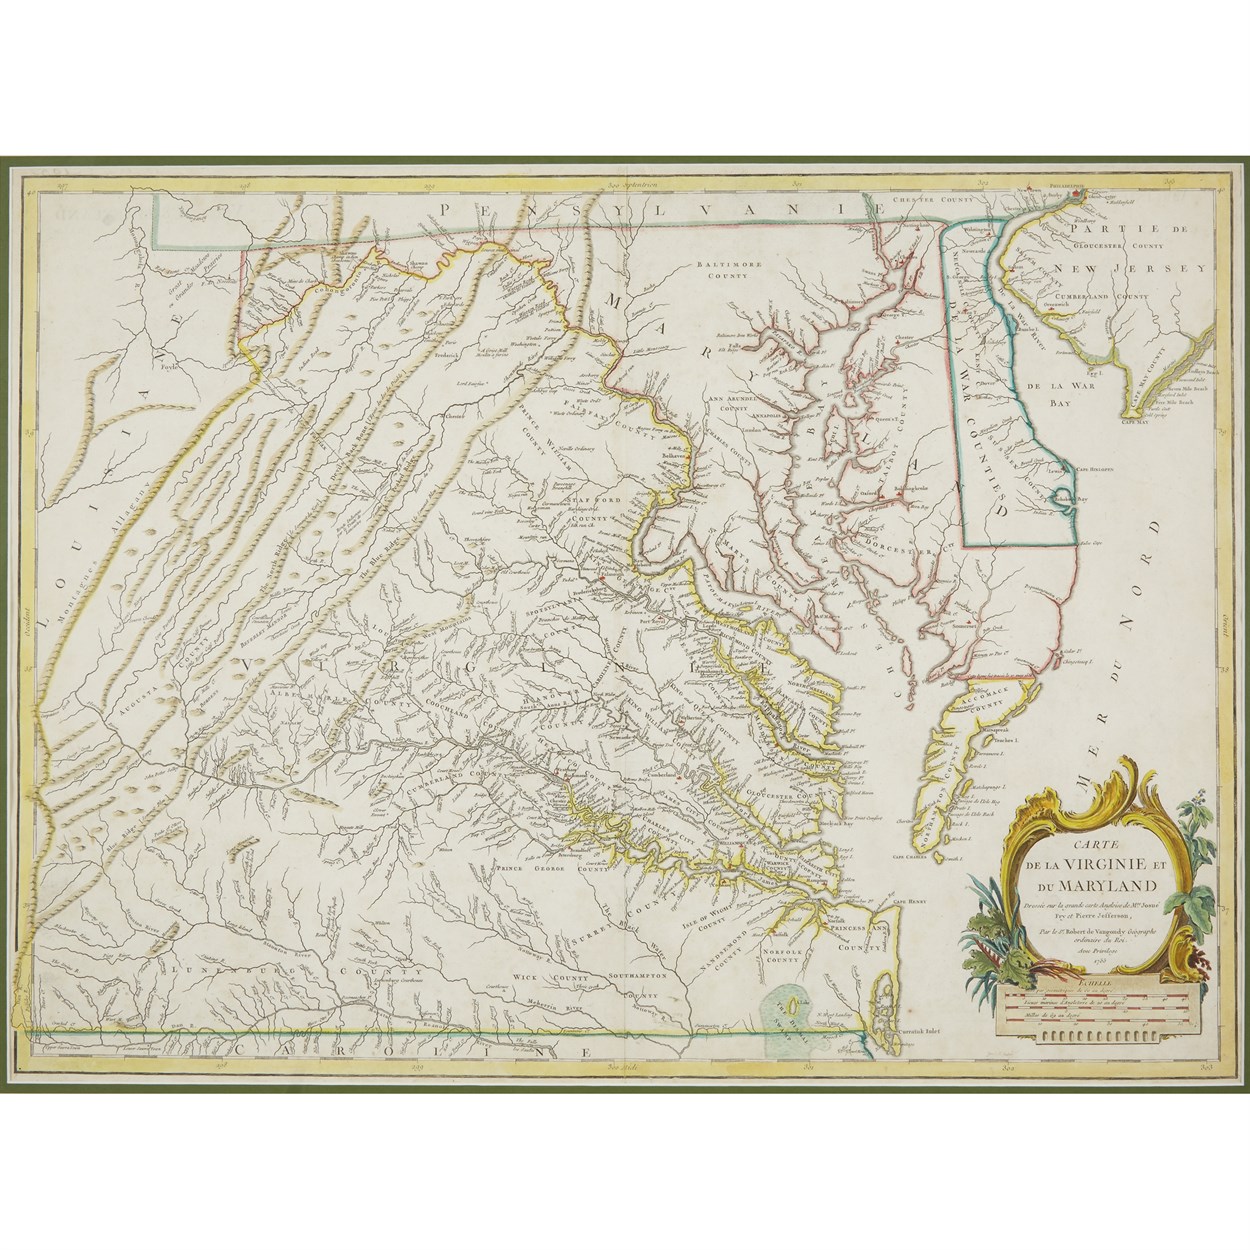 Lot 80 - 1 Piece. Engraved map hand colored in outline....